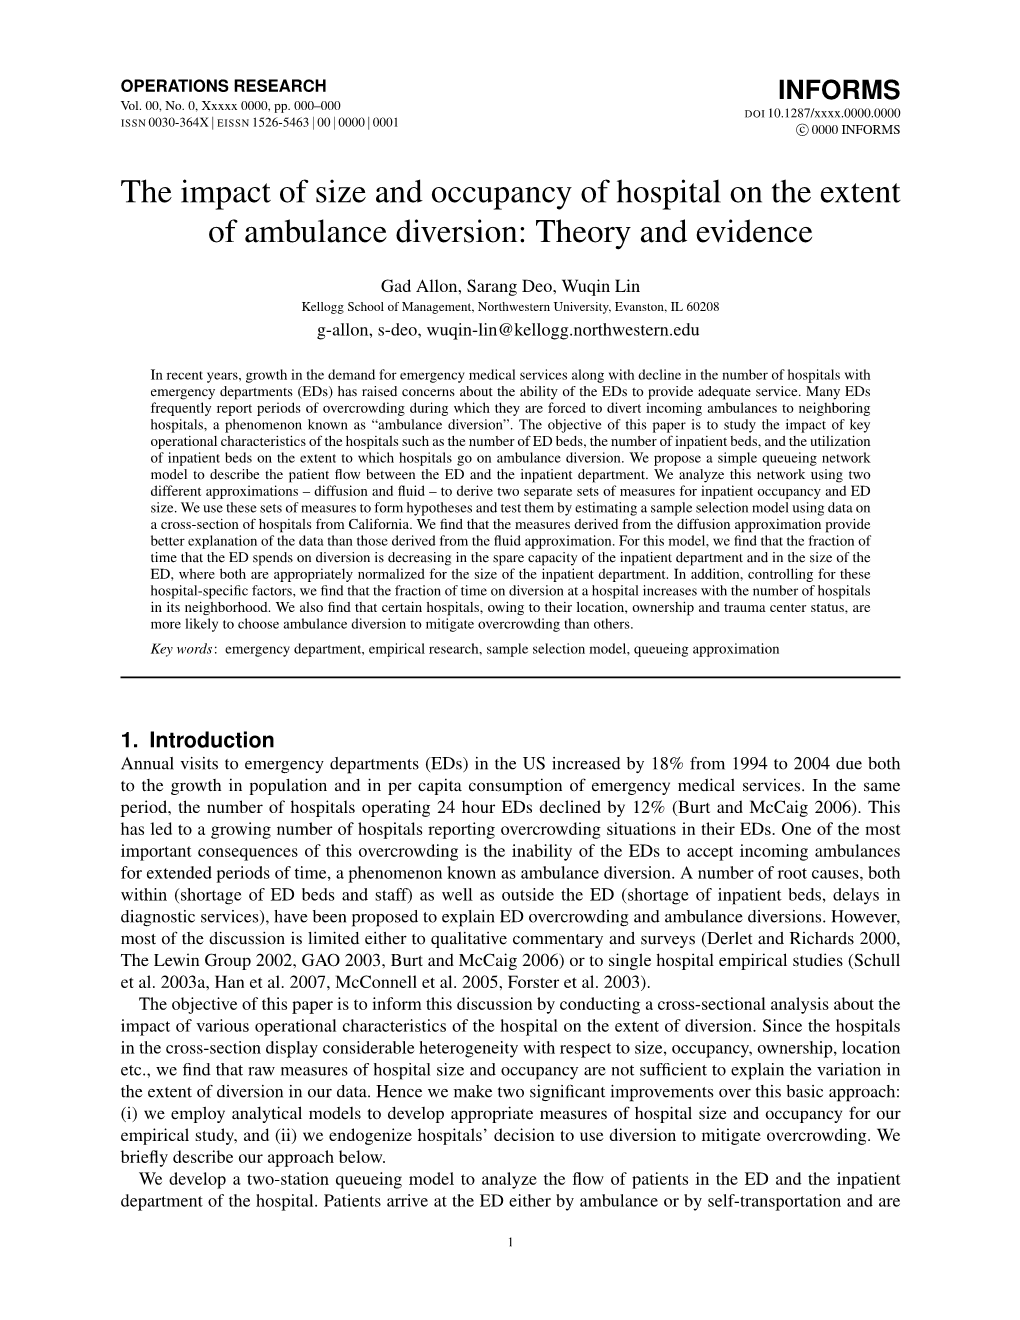 The Impact of Size and Occupancy of Hospital on the Extent of Ambulance Diversion: Theory and Evidence